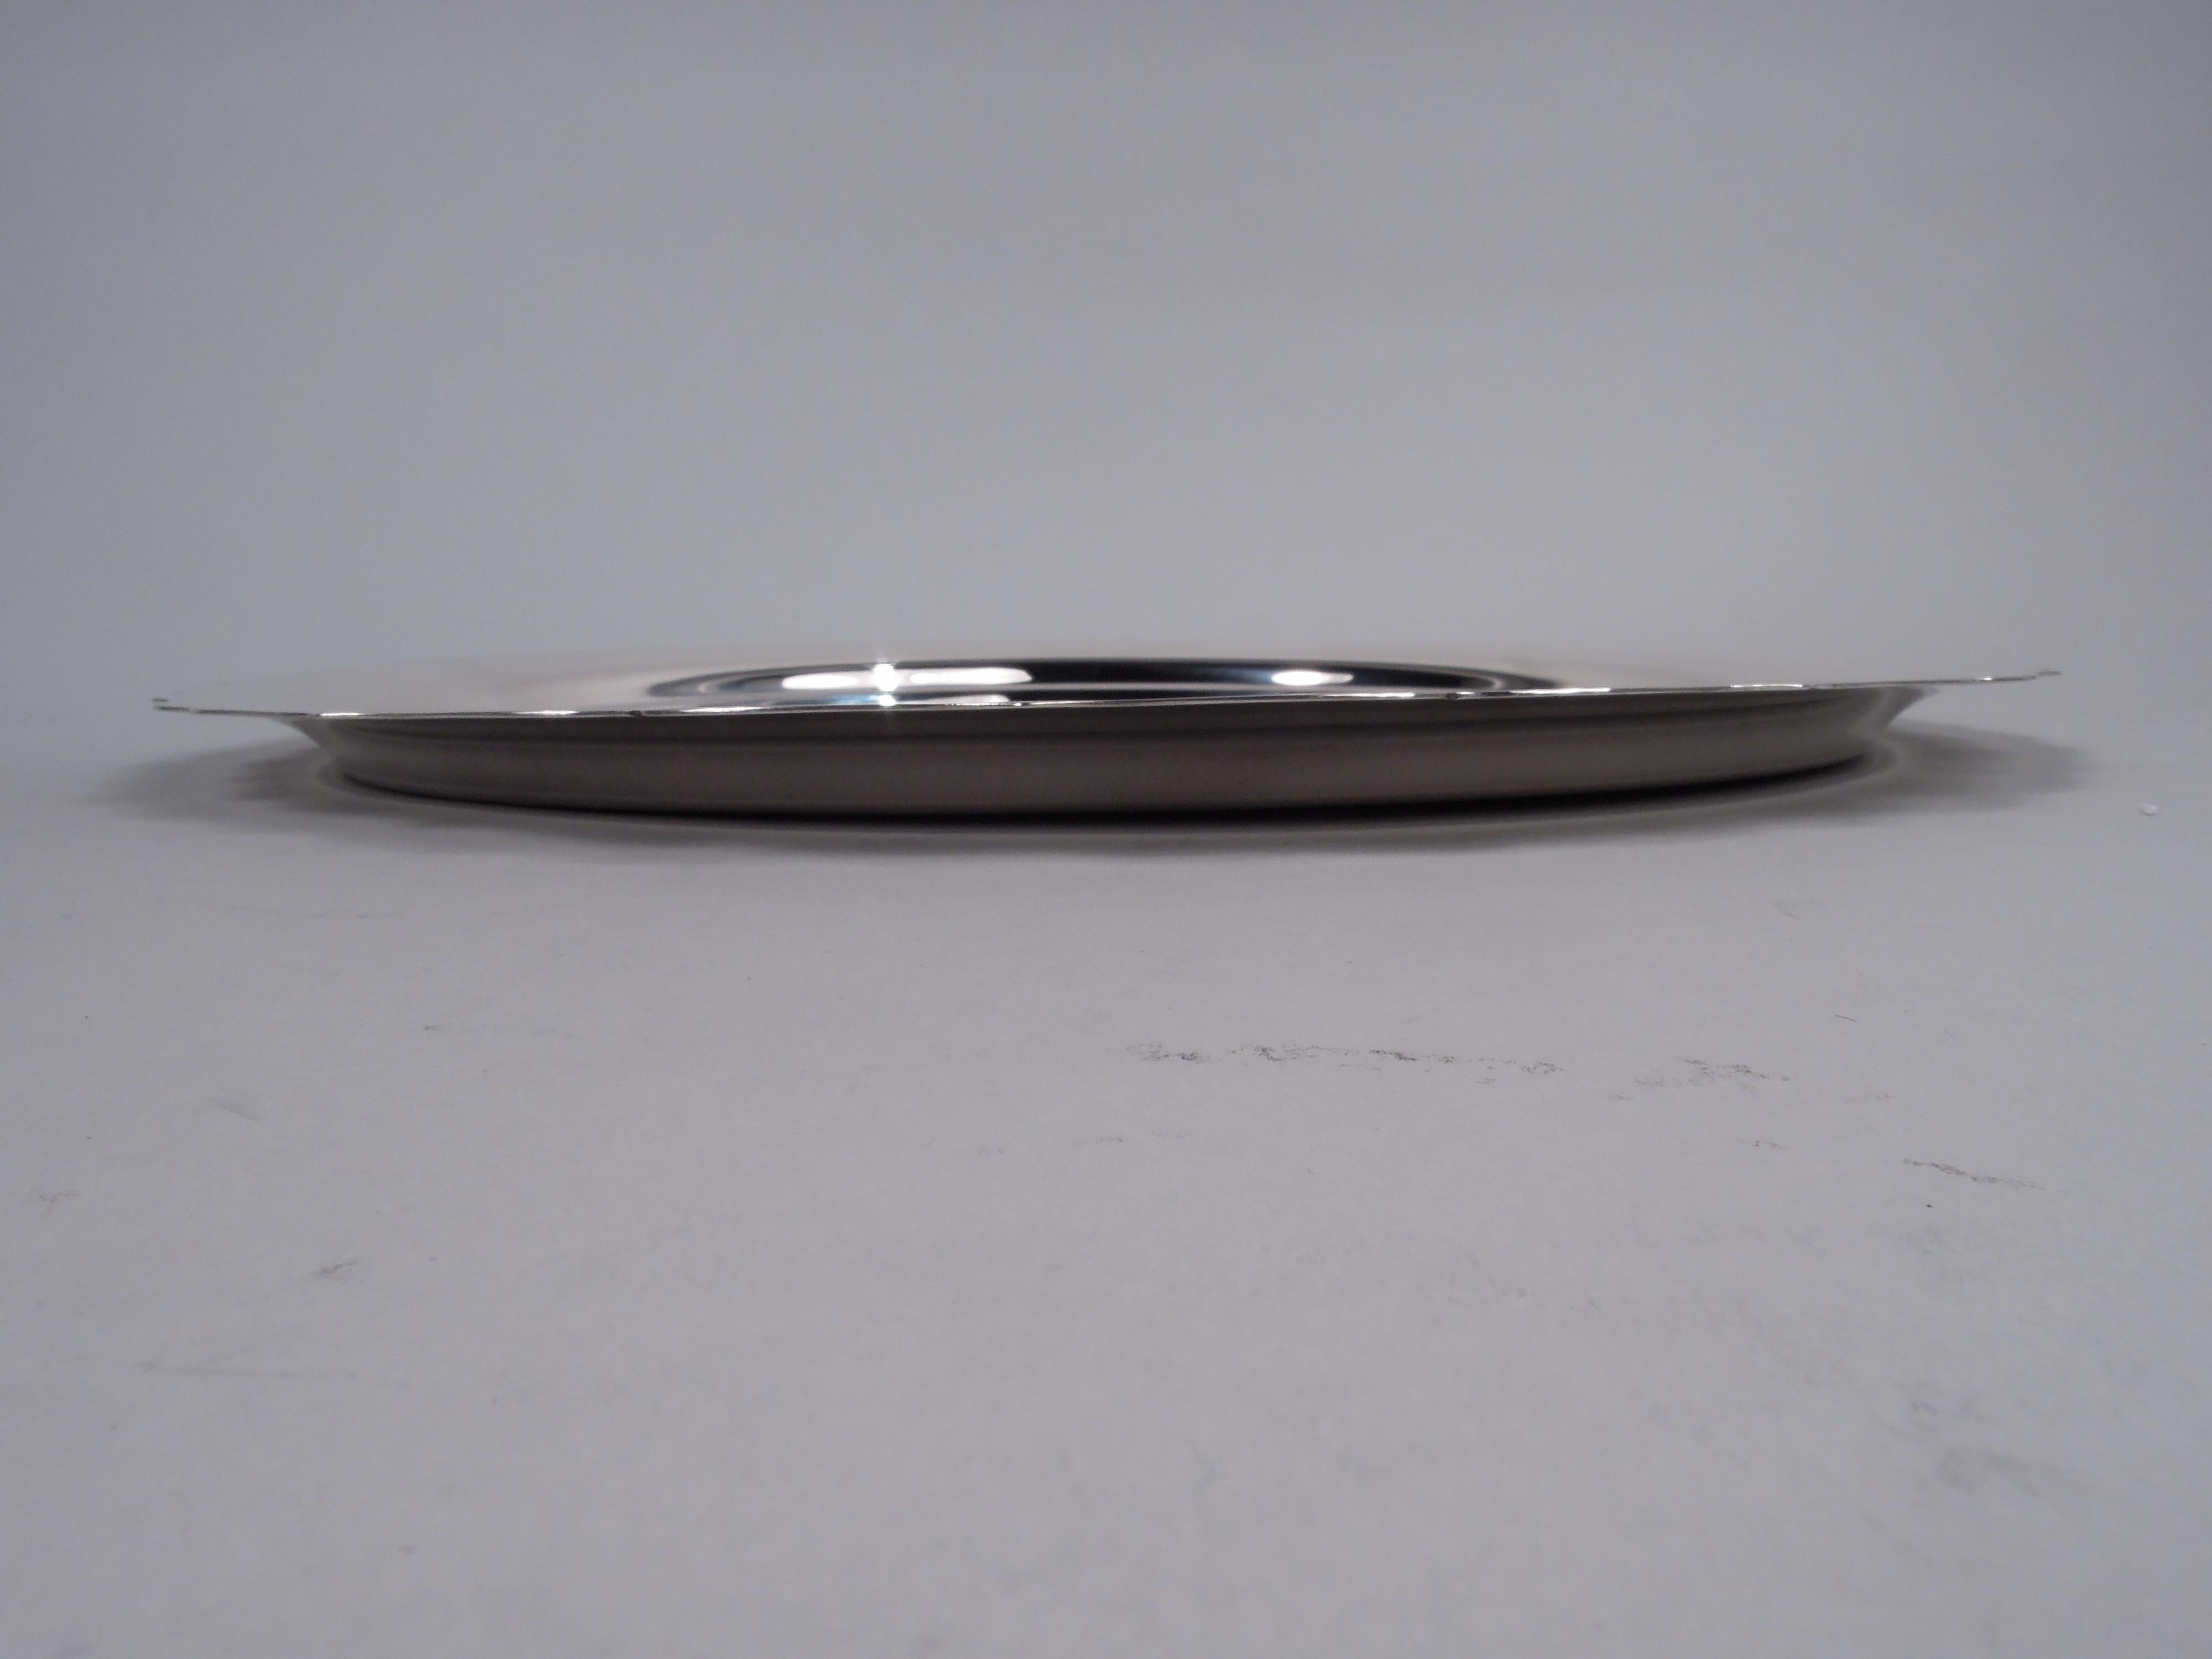 Modern Georgian sterling silver tray. Made by Hamilton Silver Co. Inc. in New York, ca 1950. Round well and sharp ogee piecrust rim. Fully marked including maker’s stamp and no. 92. Weight: 20 troy ounces. 